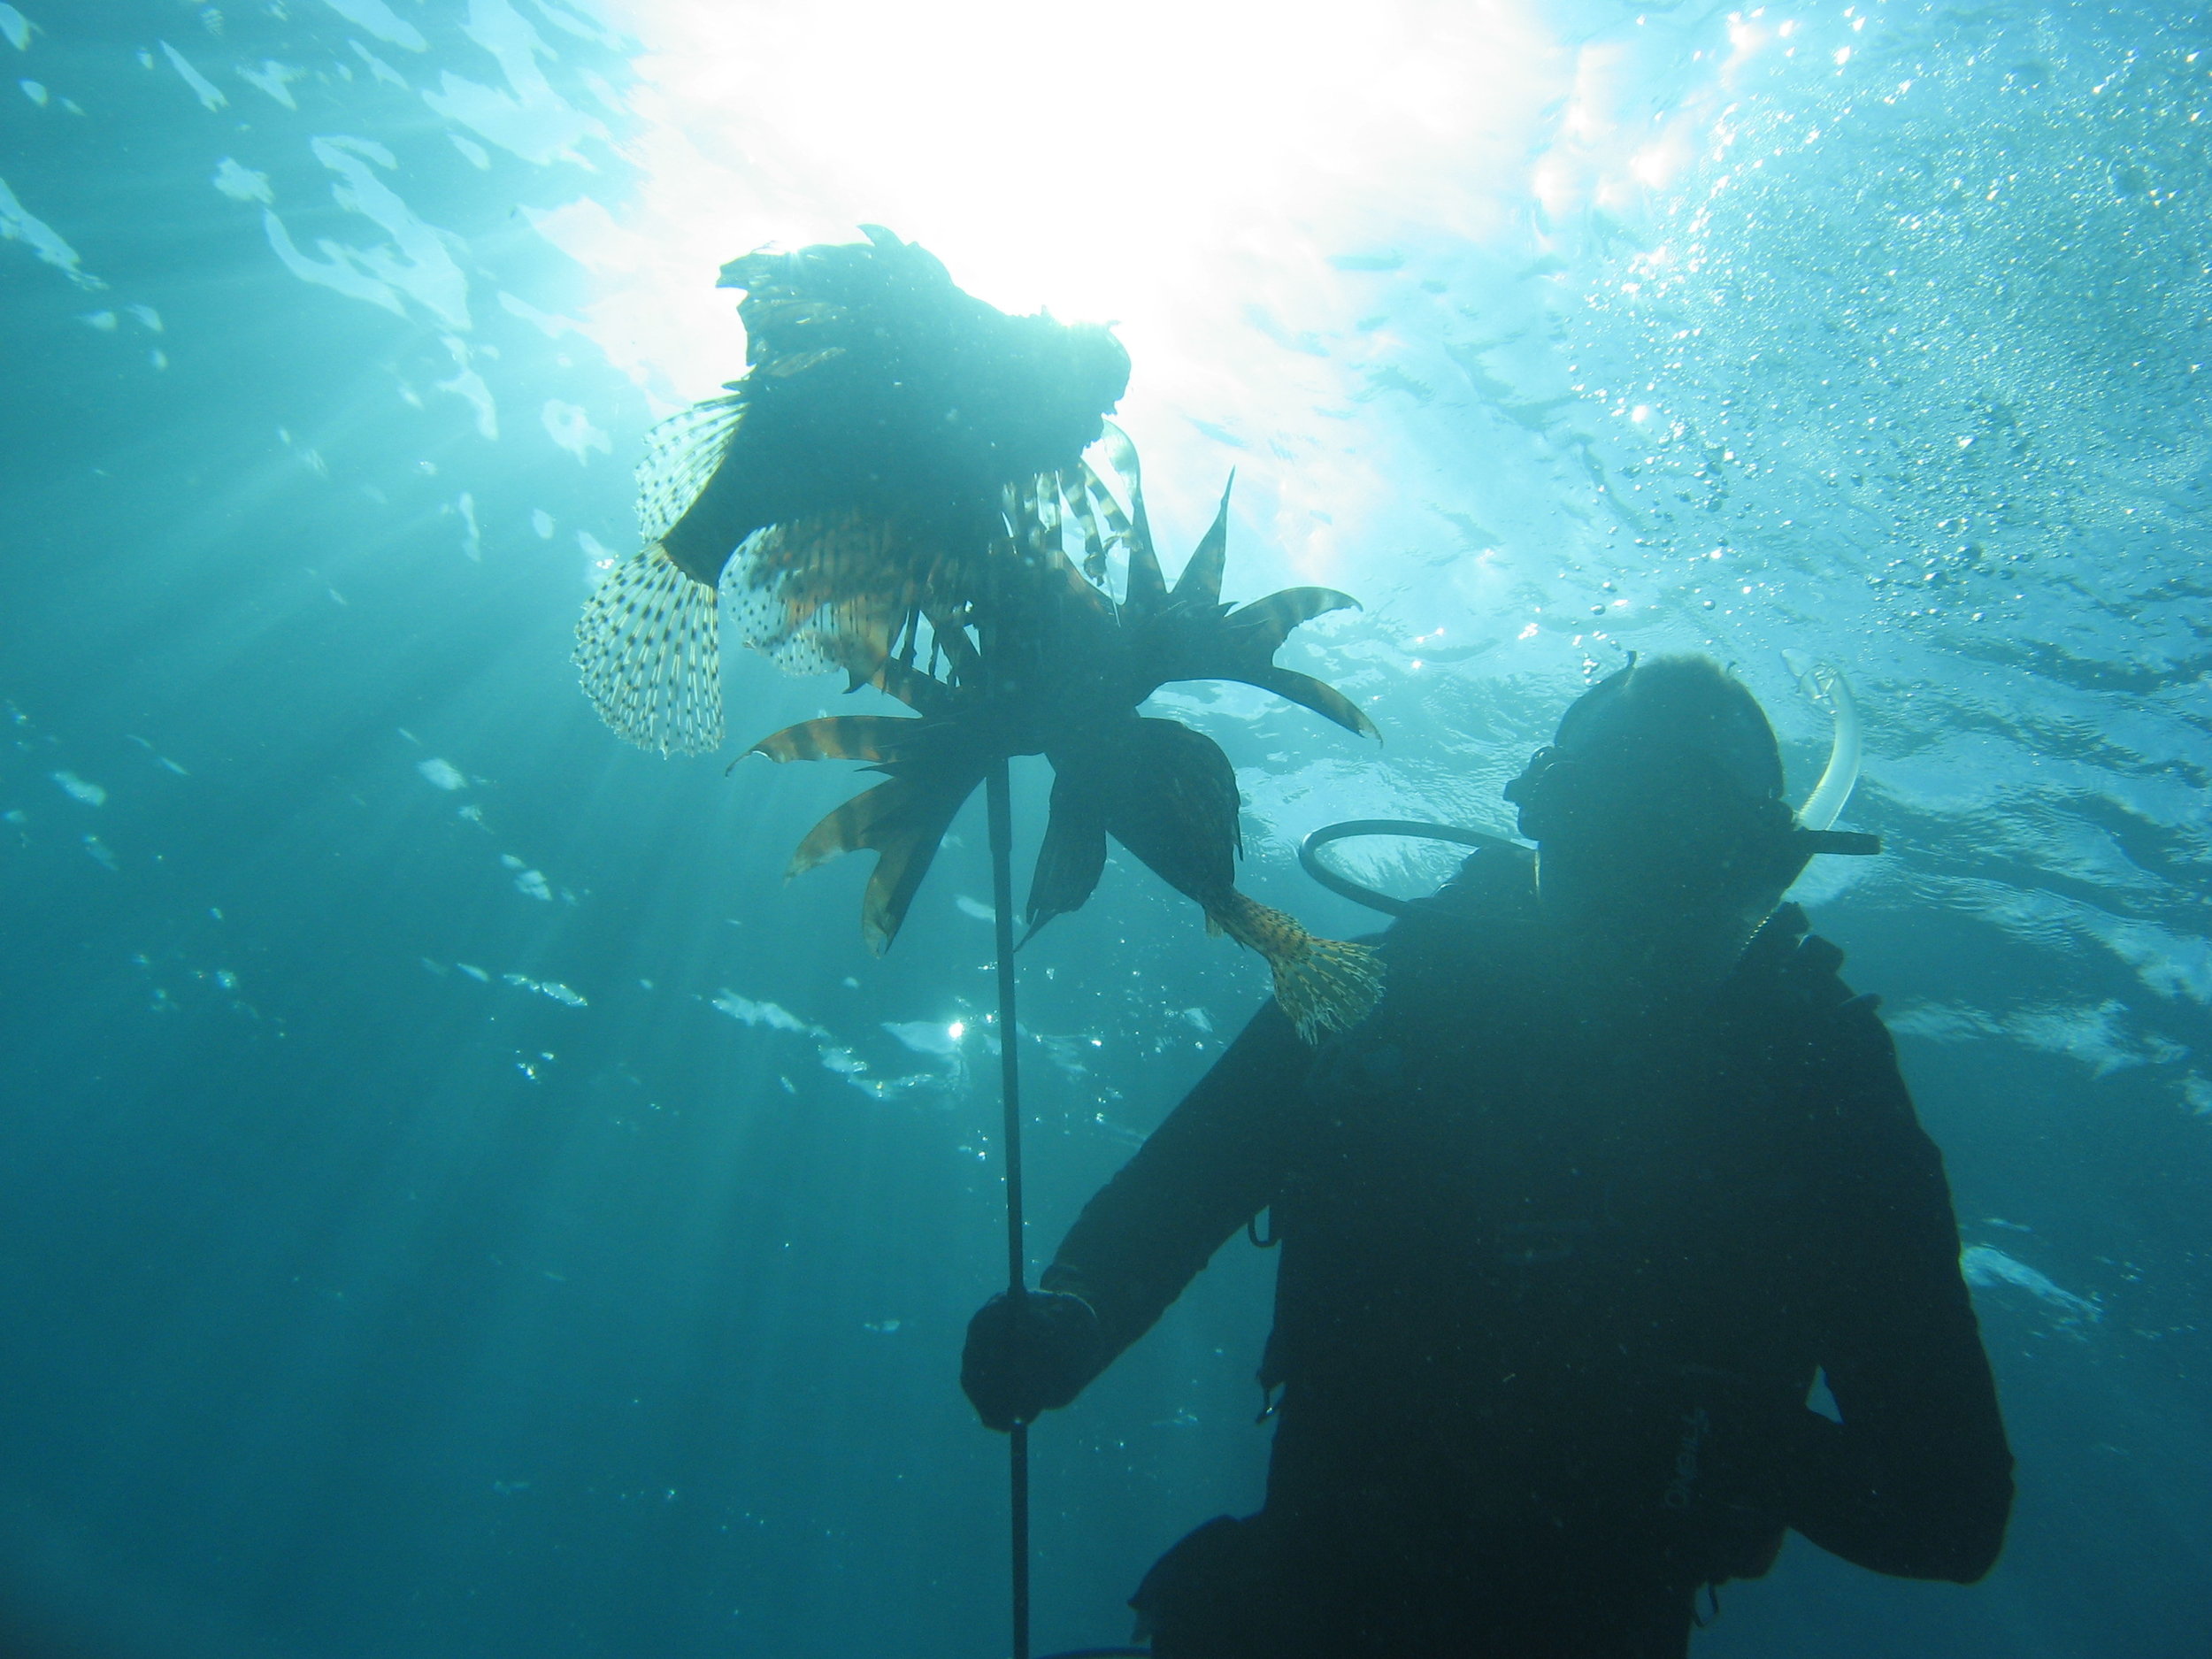 Dr. David Baker after a successful research dive and lionfish hunt